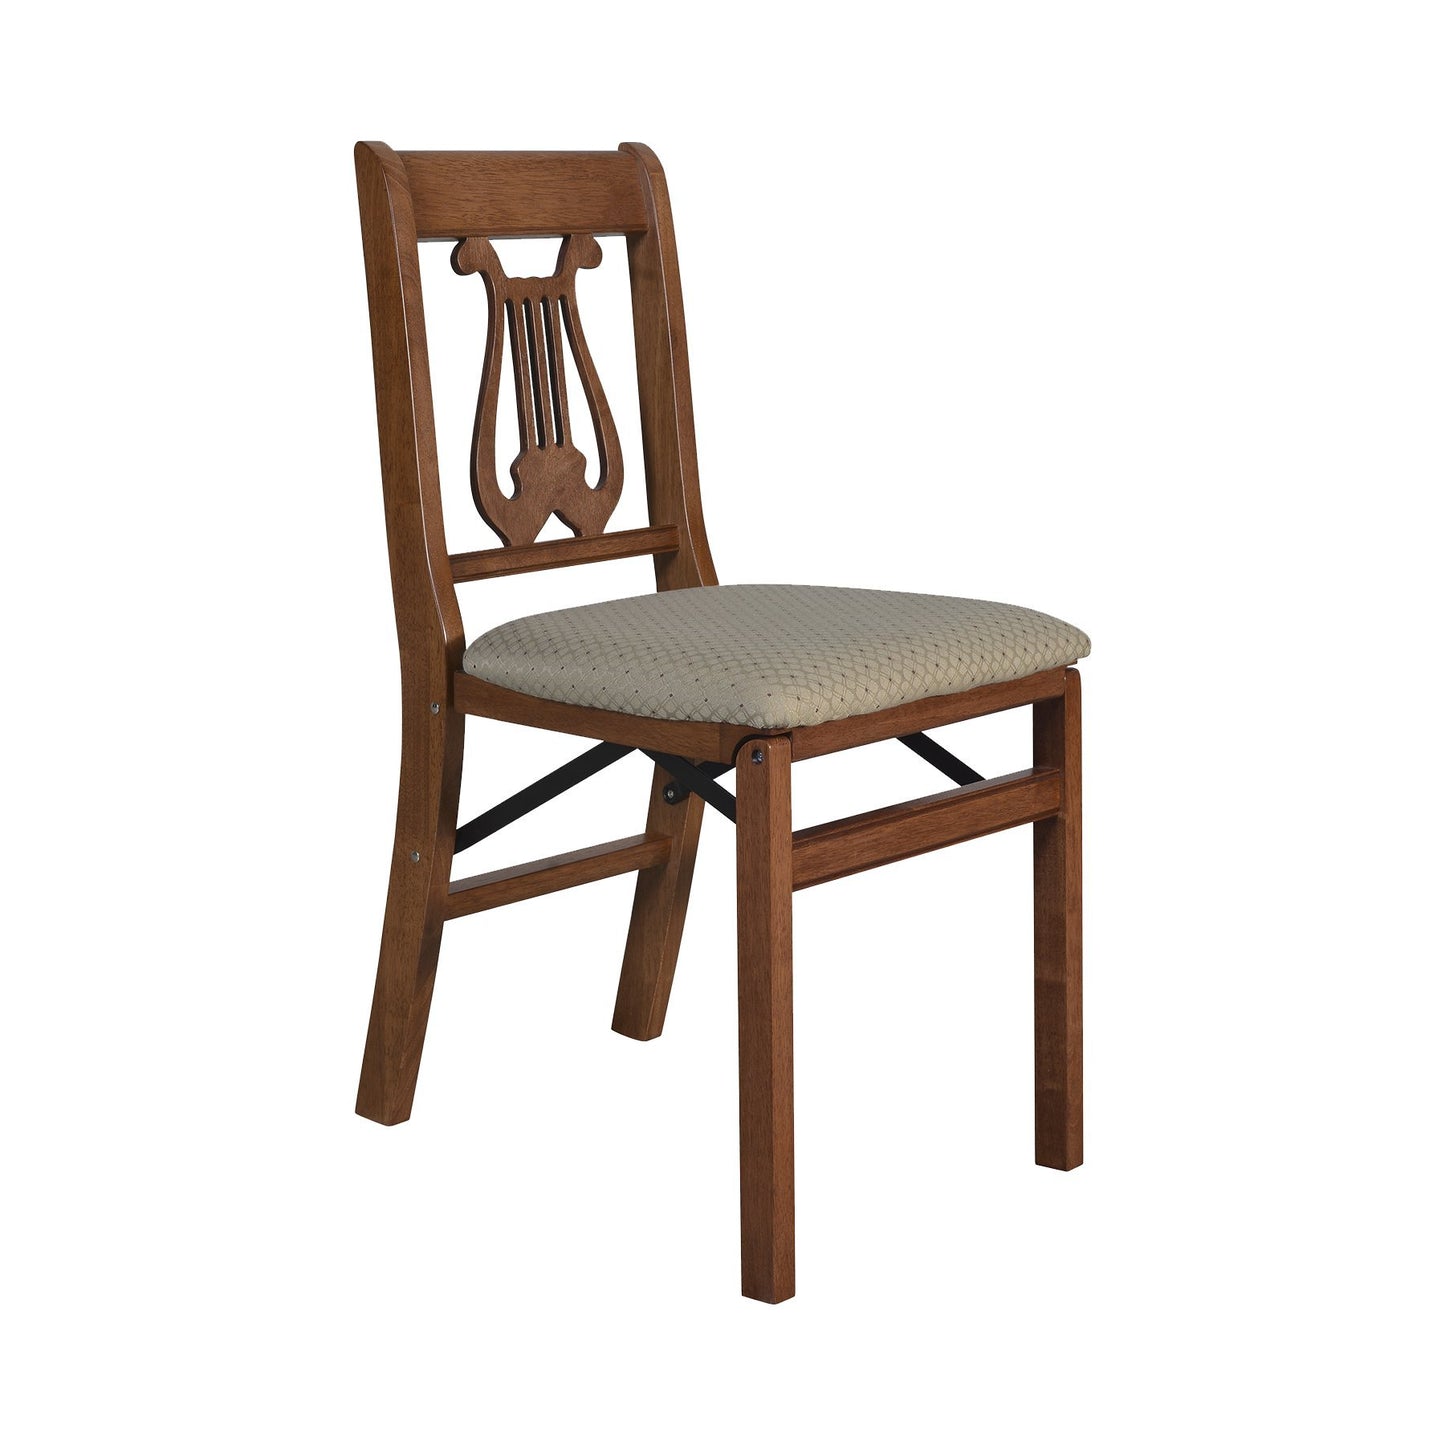 Stakmore Music Back Folding Chair Finish, Set of 2, Cherry